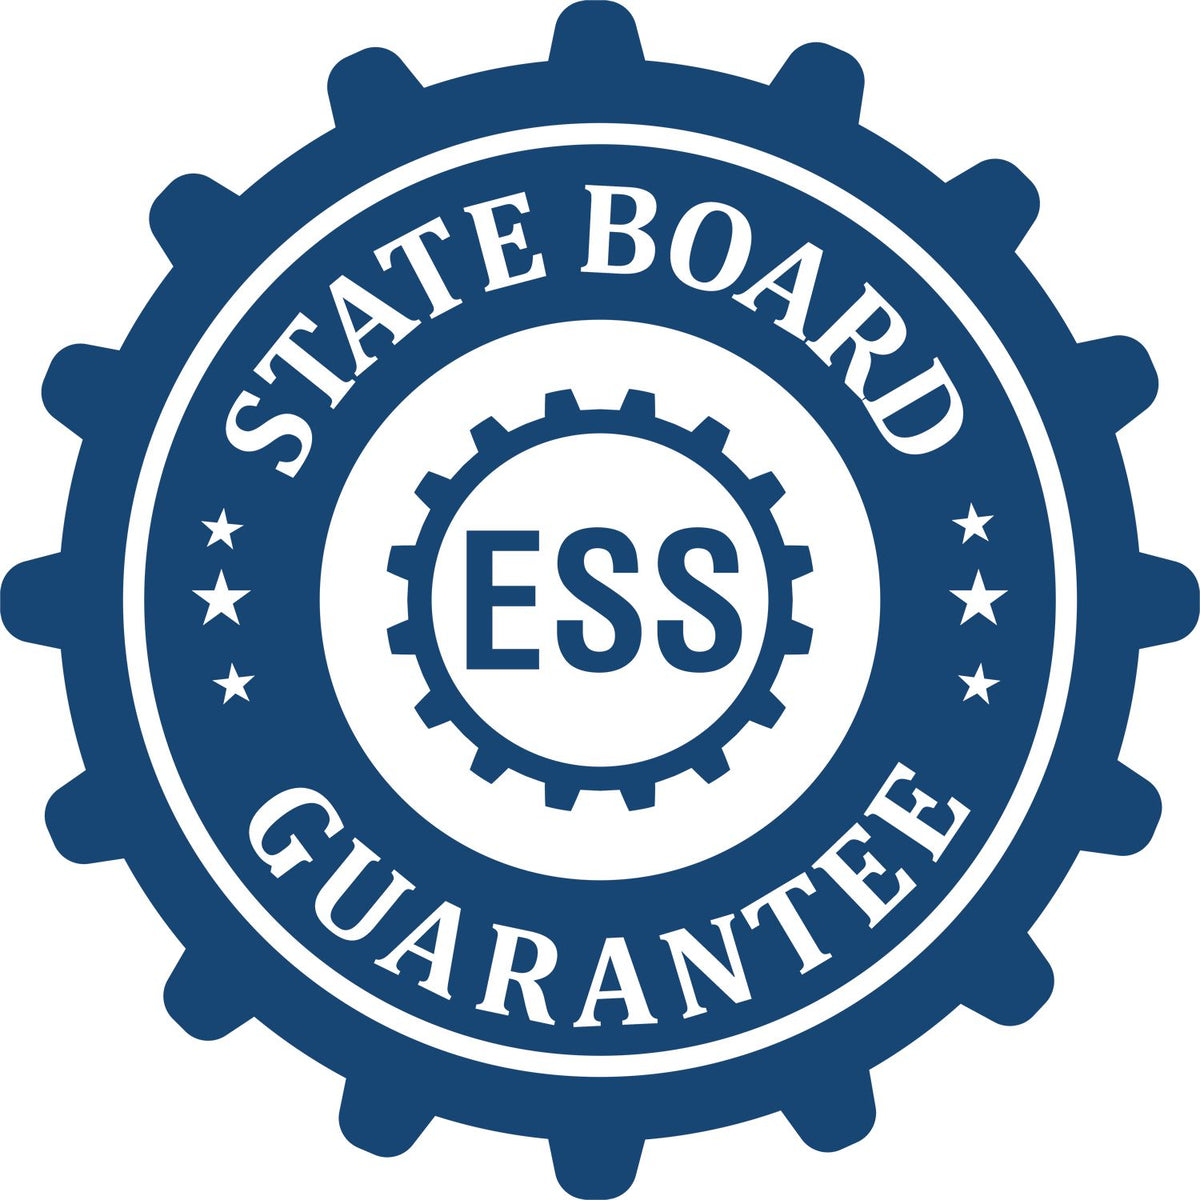 An emblem in a gear shape illustrating a state board guarantee for the State of Utah Extended Long Reach Geologist Seal